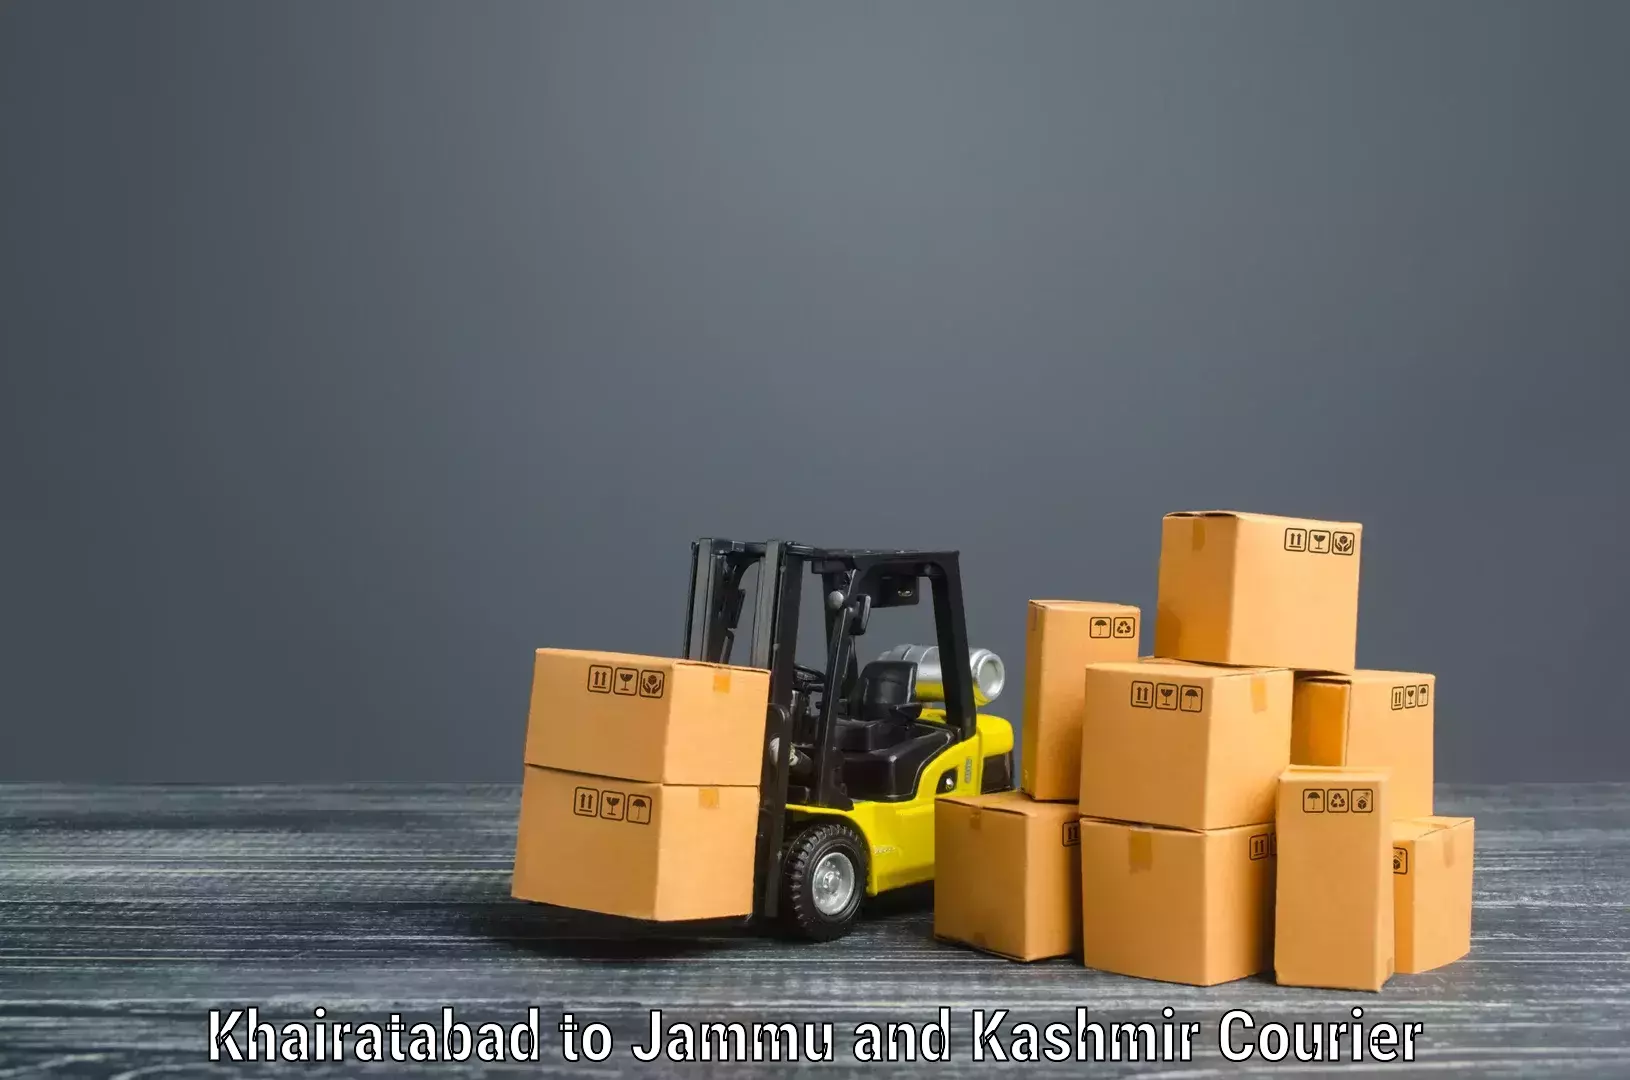 Furniture relocation experts Khairatabad to Jammu and Kashmir